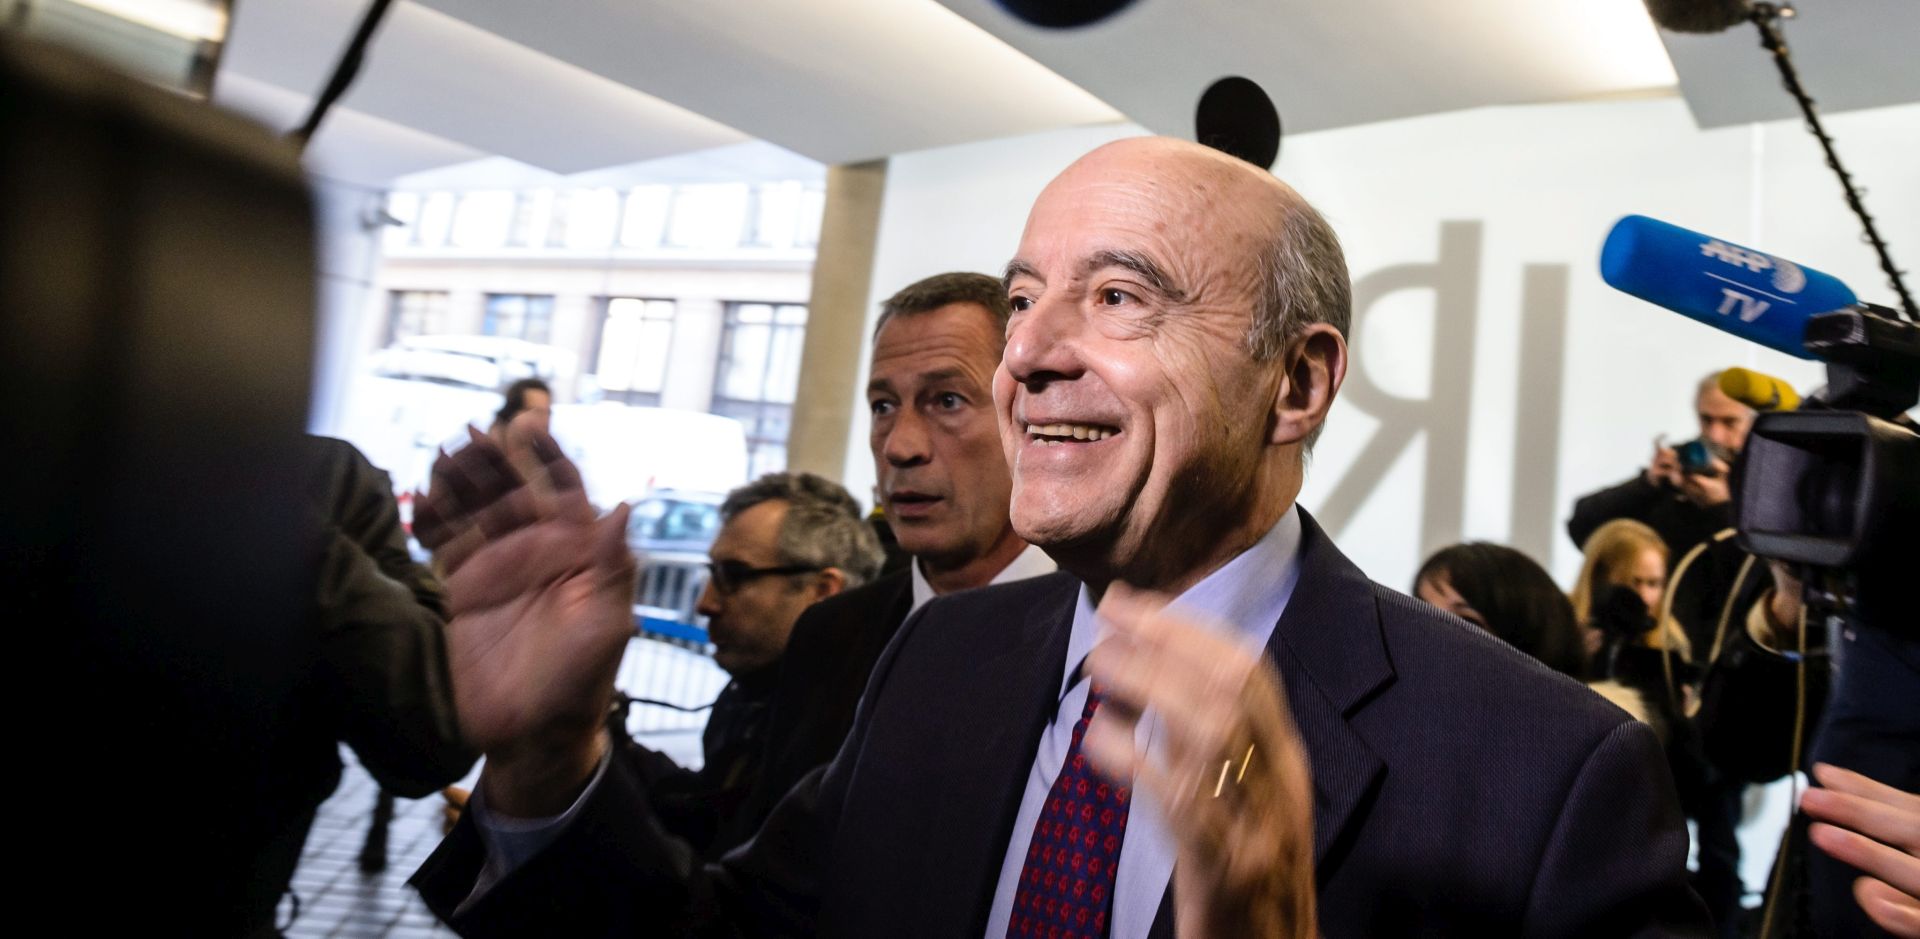 epa05058253 Former French Prime Minister and Mayor of Bordeaux Alain Juppe arrives at the 'Les Republicains' party headquarter for a political meeting in Paris, France, 07 December 2015, following the results of the French Regional Elections first round. The performance of France's anti-immigration National Front party was being closely watched in the regional elections.  EPA/CHRISTOPHE PETIT TESSON